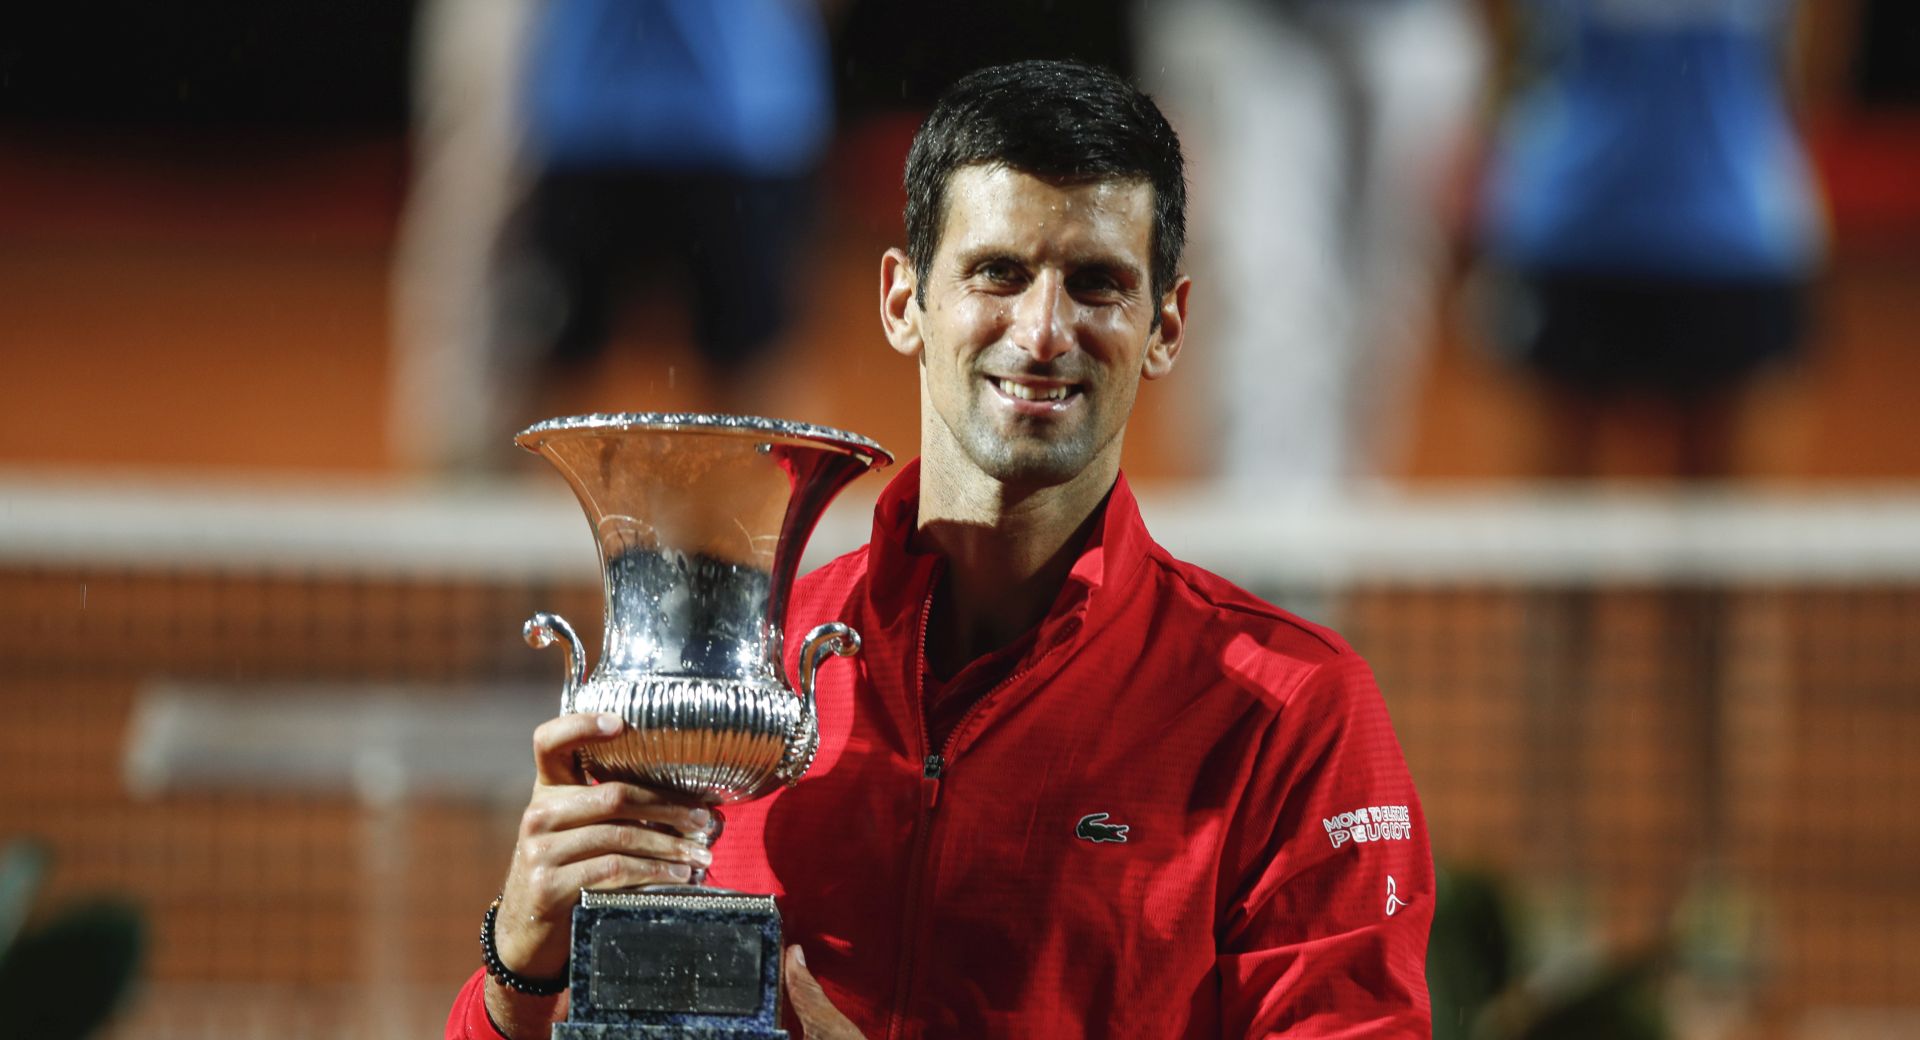 epa08686922 Novak Djokovic of Serbia celebrates with his trophy after the men's singles final round match at the Italian Open tennis tournament in Rome, Italy, 21 September 2020.  EPA/Clive Brunskill / POOL